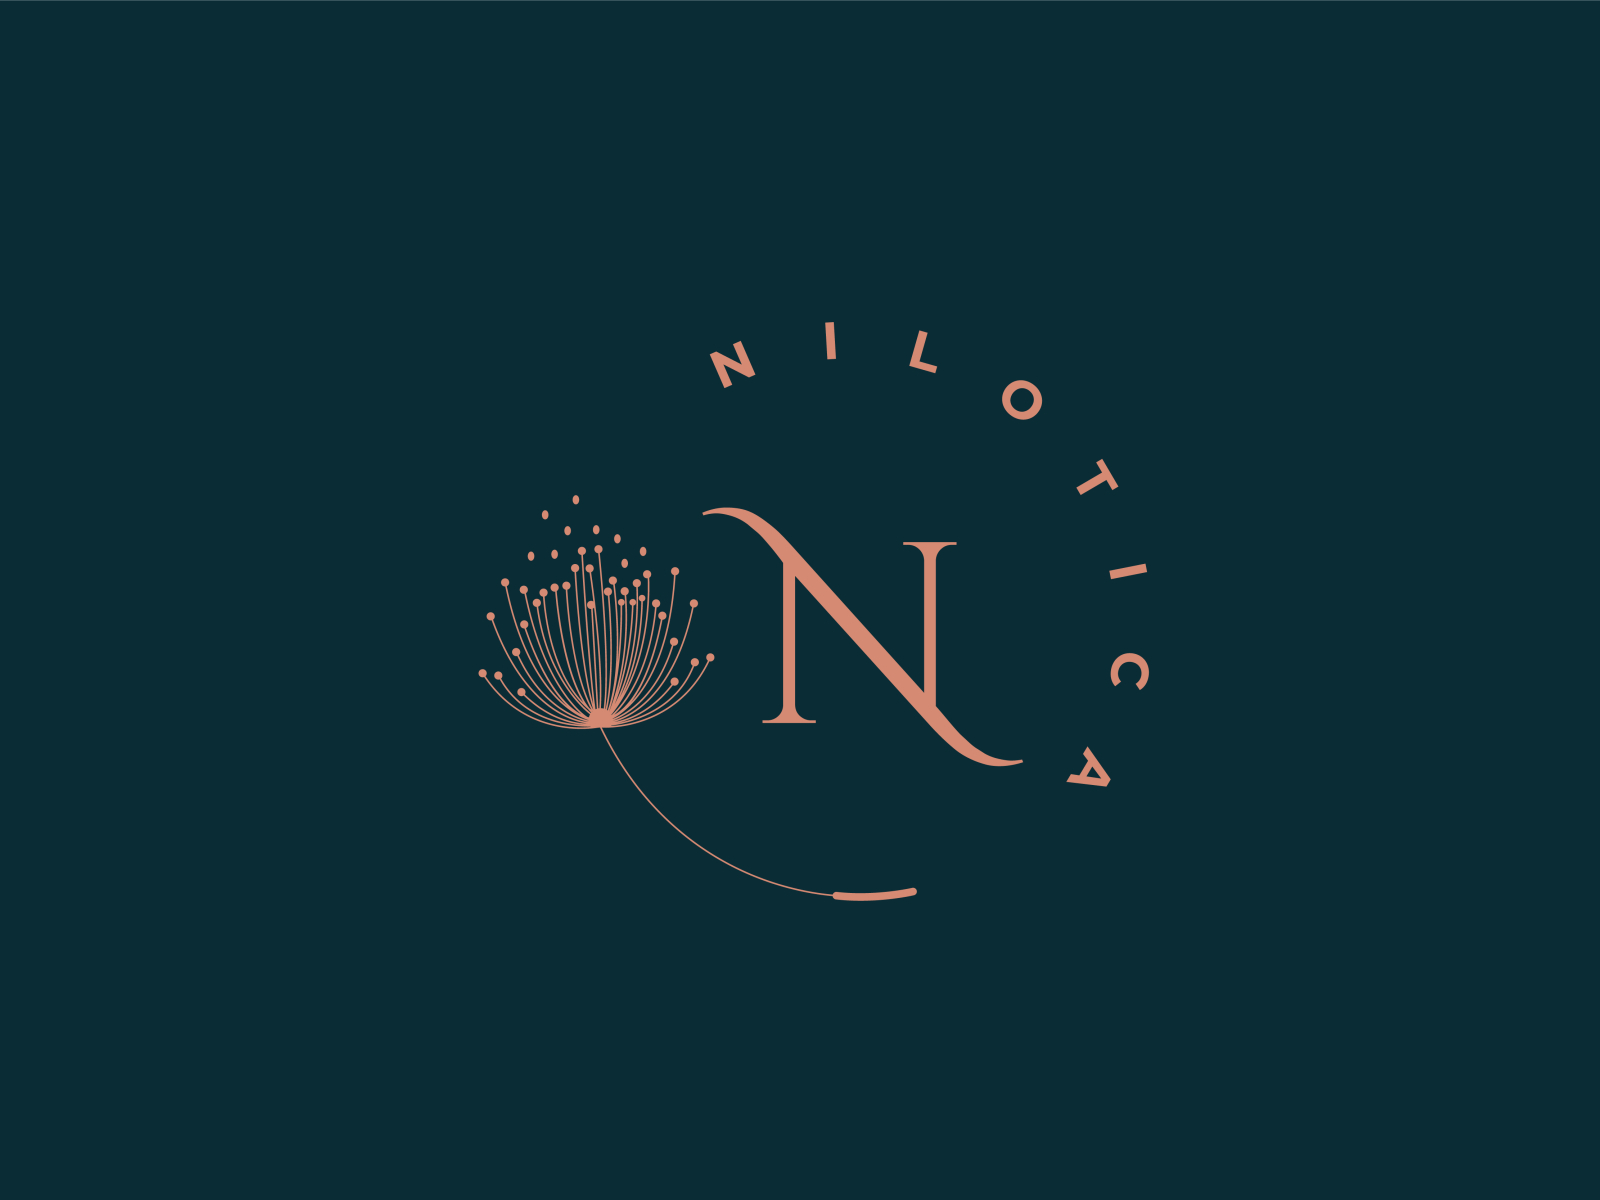 Nilotica Logo by mydezignstore on Dribbble